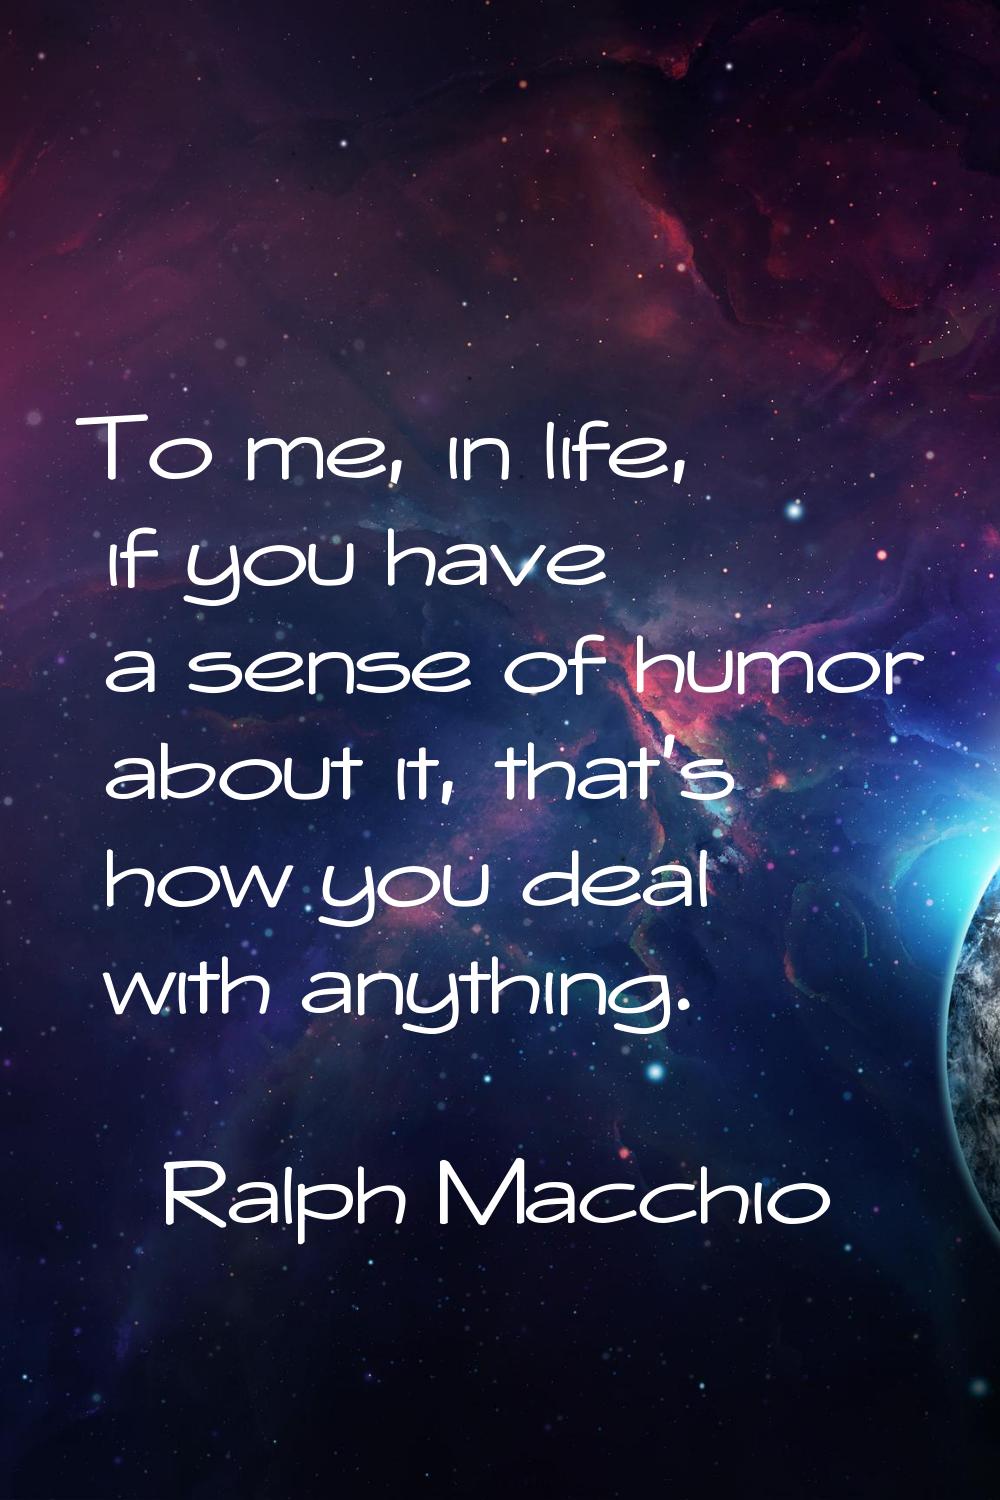 To me, in life, if you have a sense of humor about it, that's how you deal with anything.